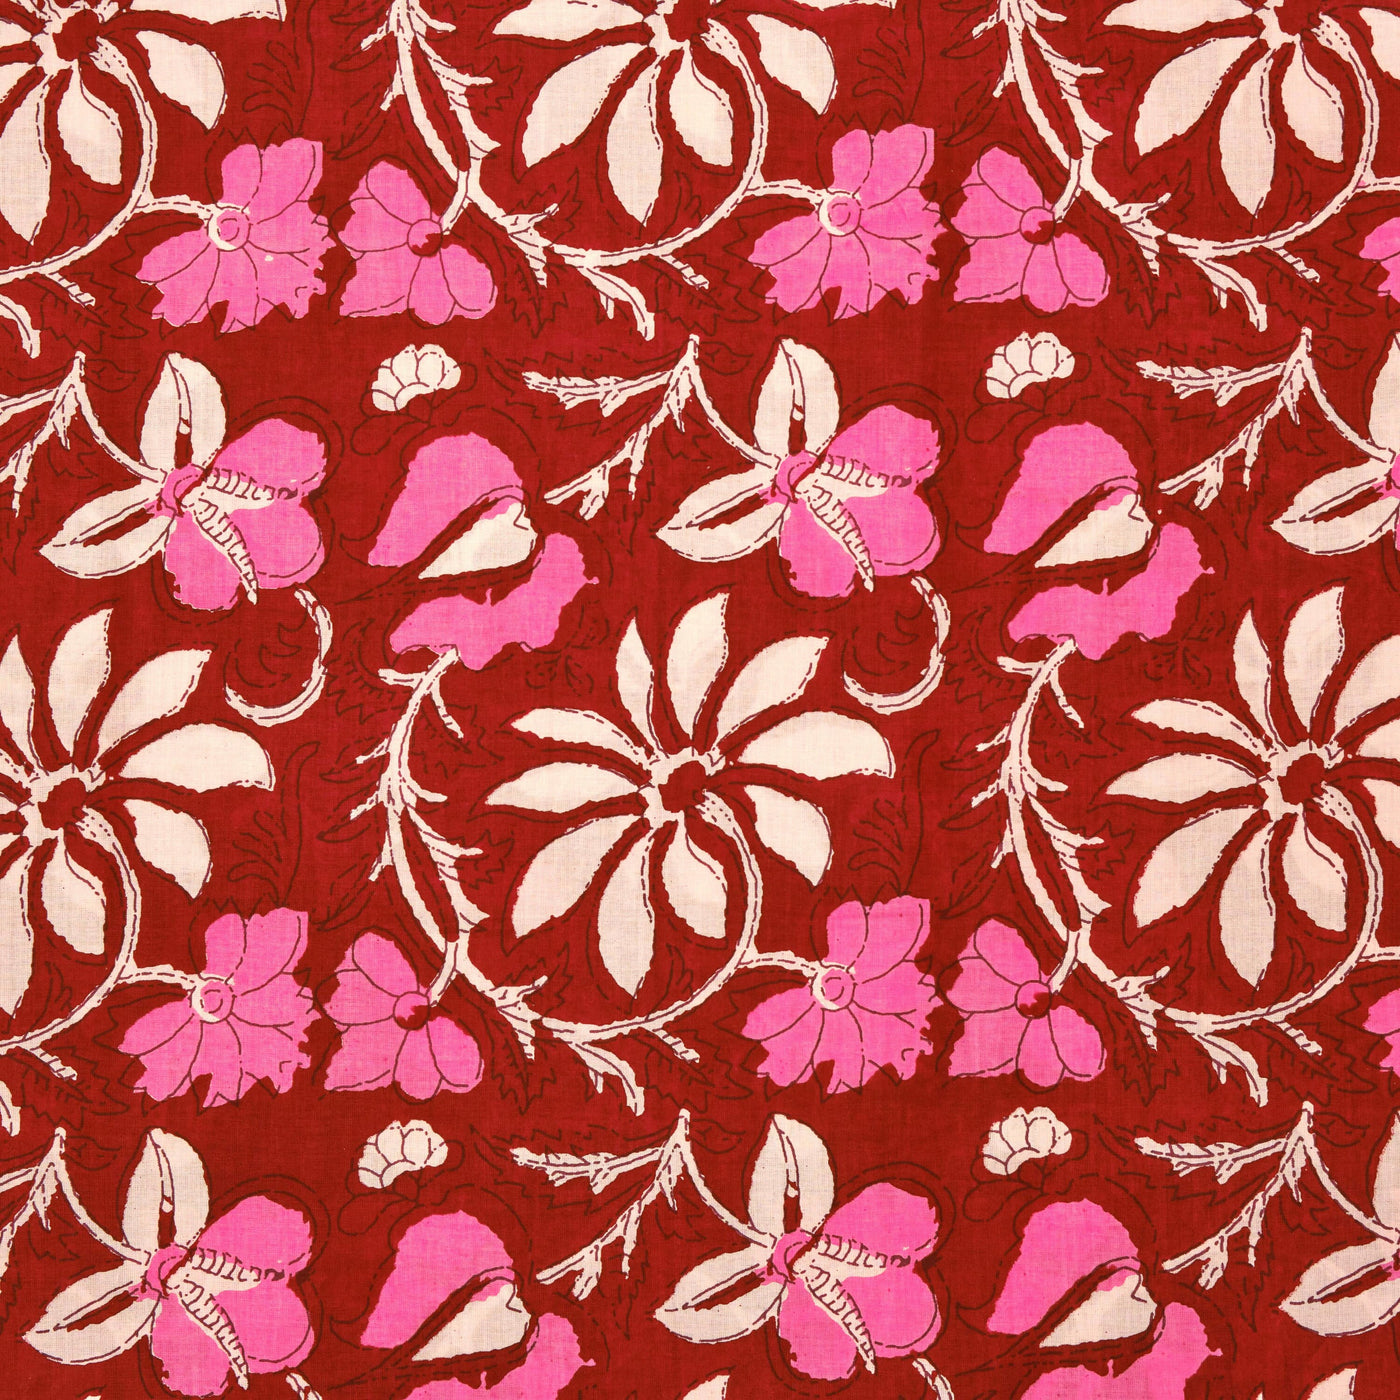 Mahogany, Thulian and Watermelon Pink Indian Floral Printed 100% Pure Cotton Cloth, Fabric by the yard, Women's Clothing Curtains Pillows